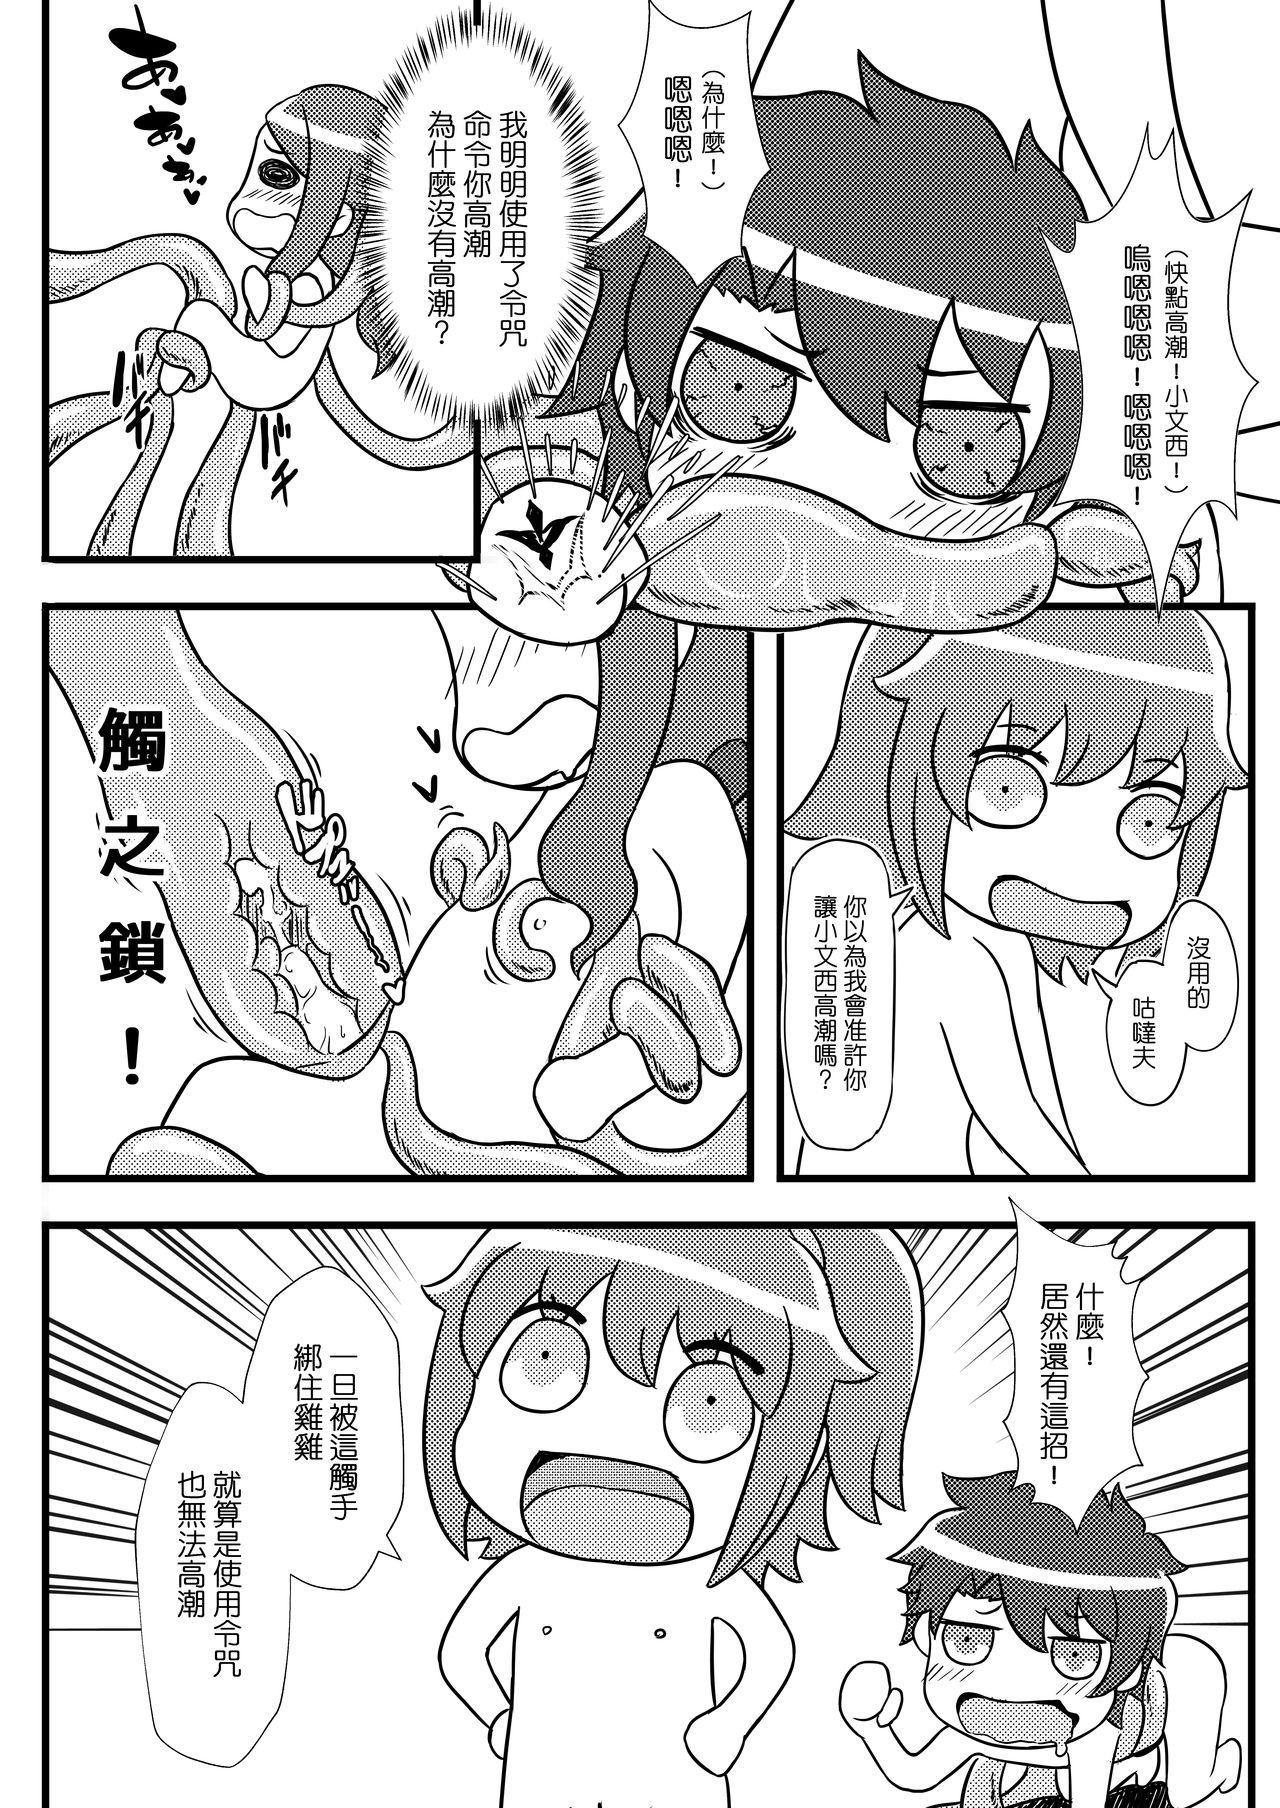 Music Fate Grand Oh・Shit!V - Fate grand order Pattaya - Page 7